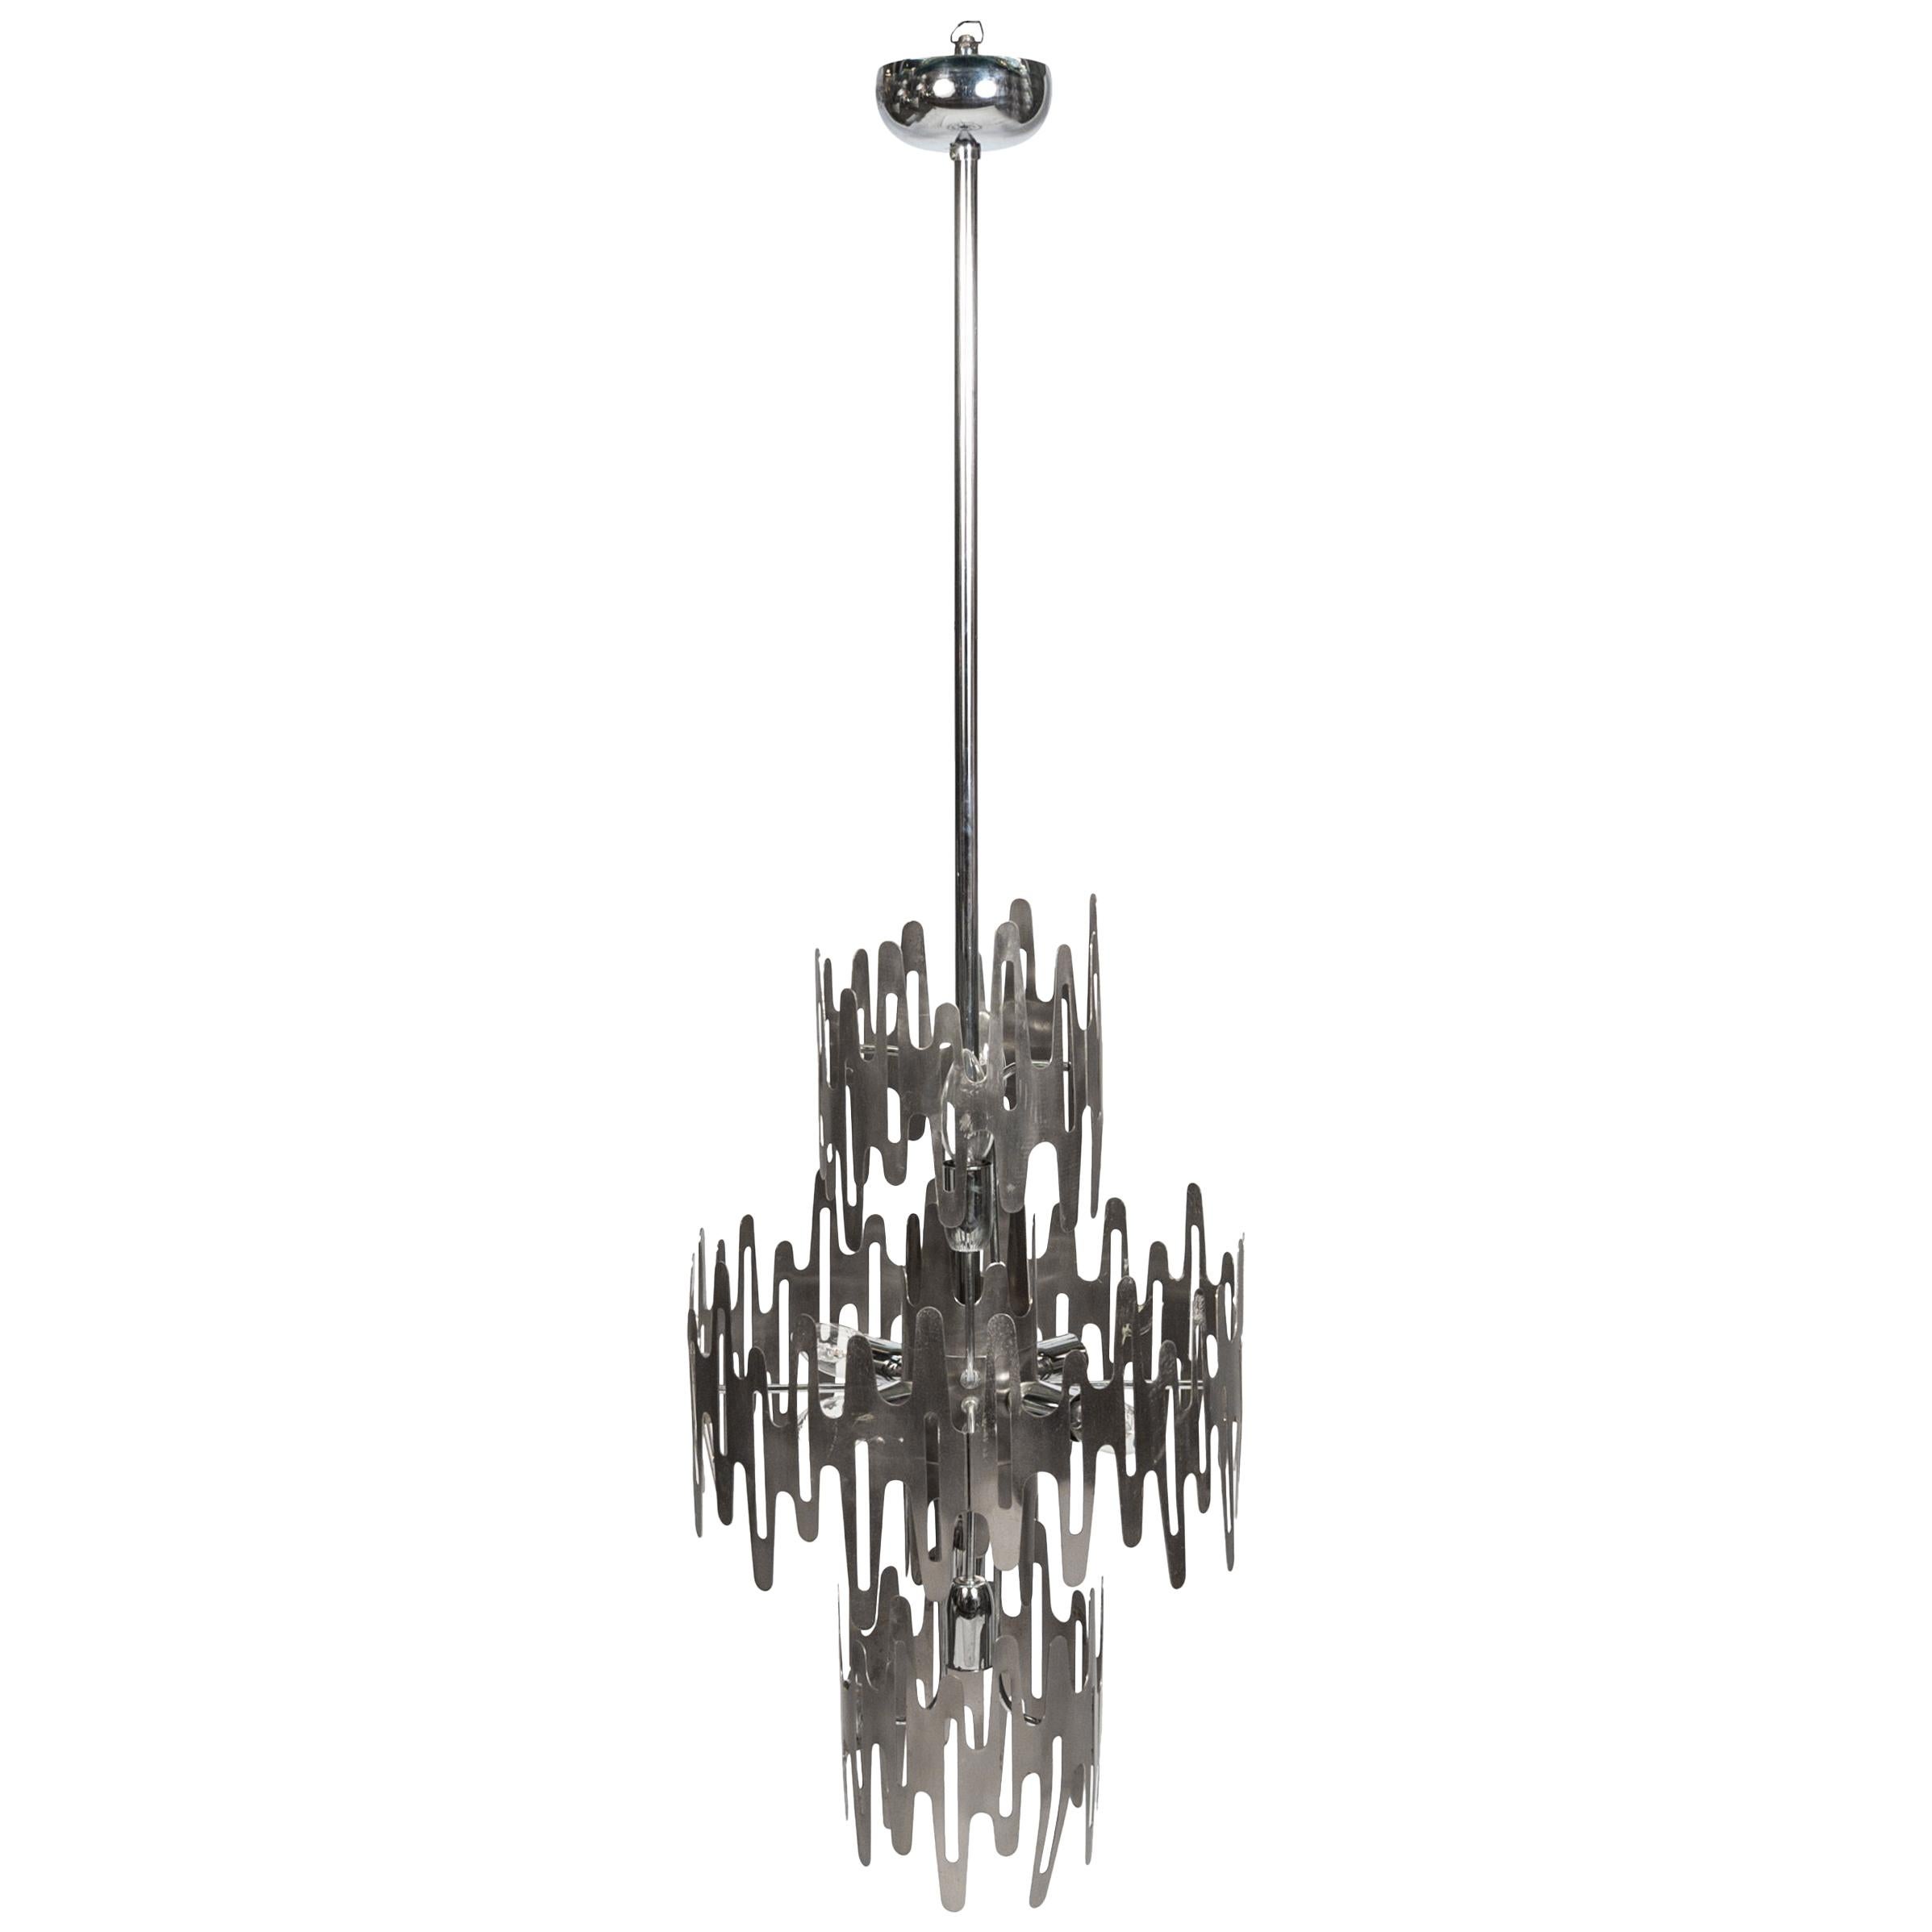 Rare "Space Age" Chandelier